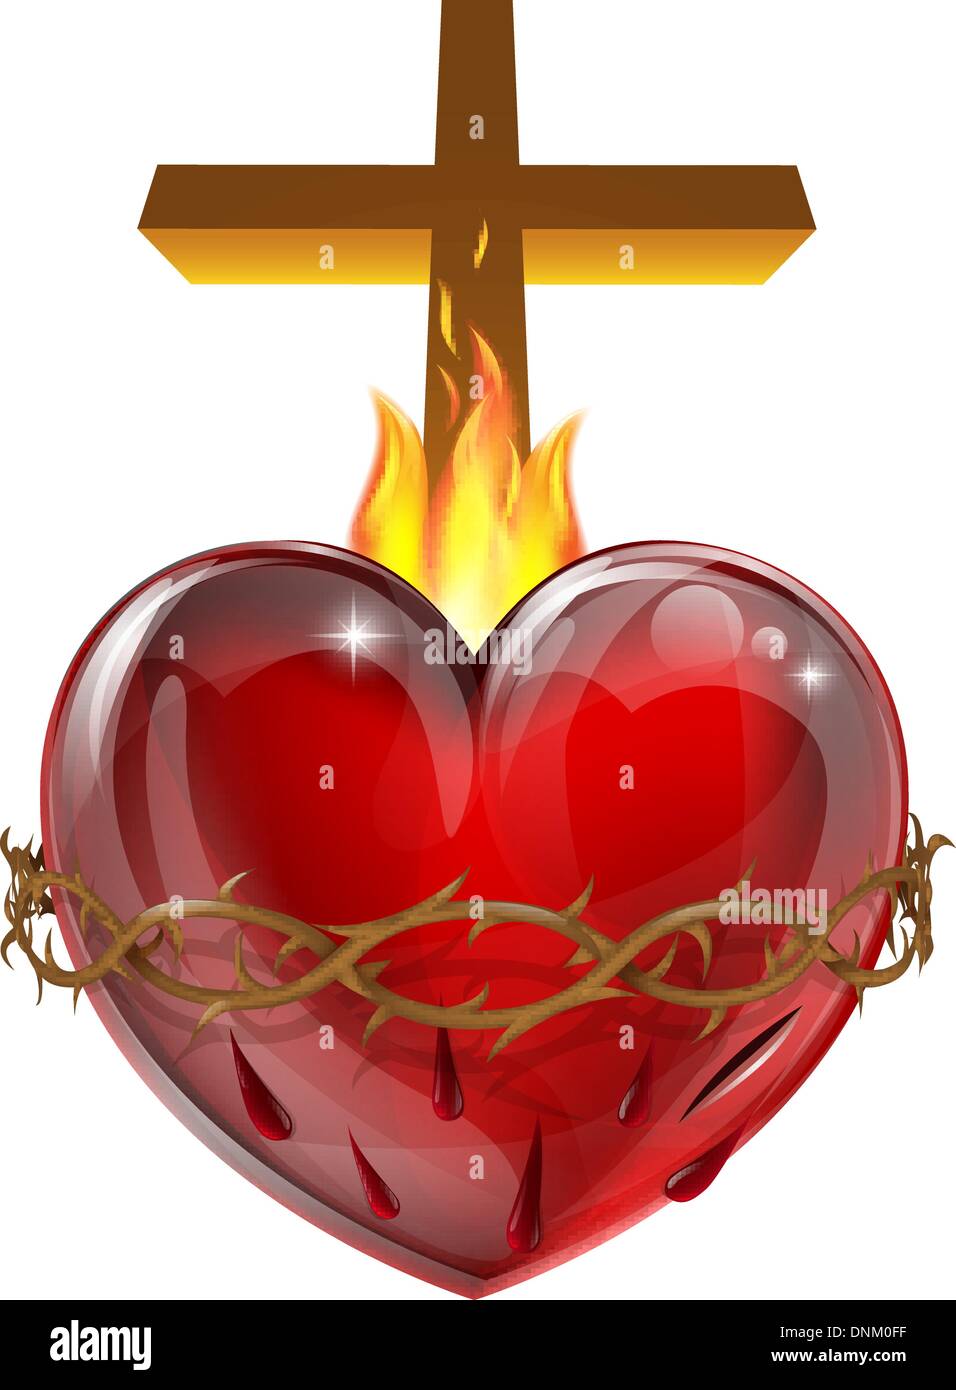 Illustration of the Sacred Heart, representing Jesus Christ's divine love for humanity. Stock Vector